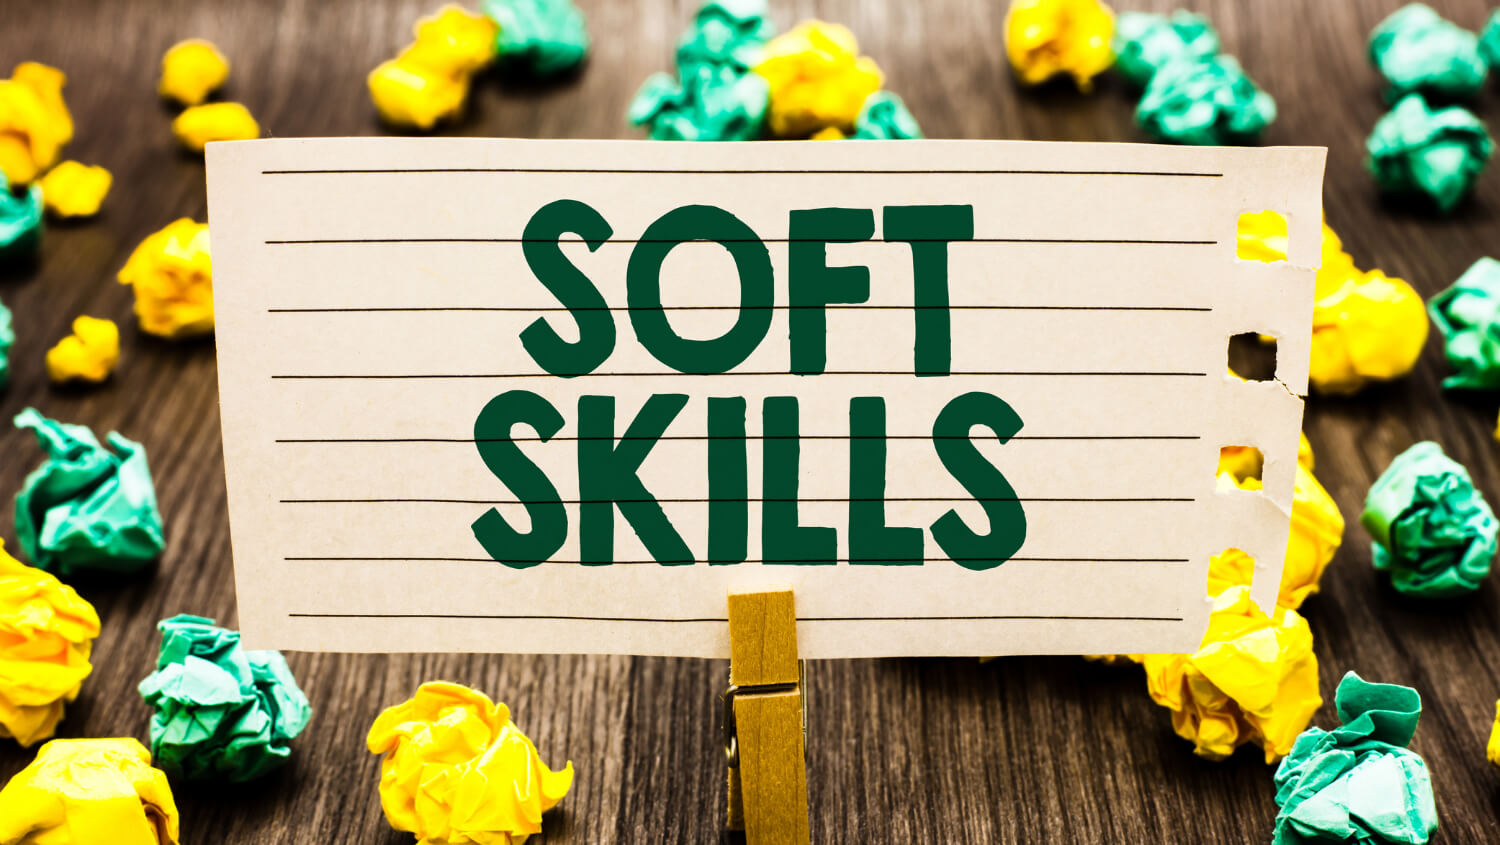 The soft skills your patients expect you to have